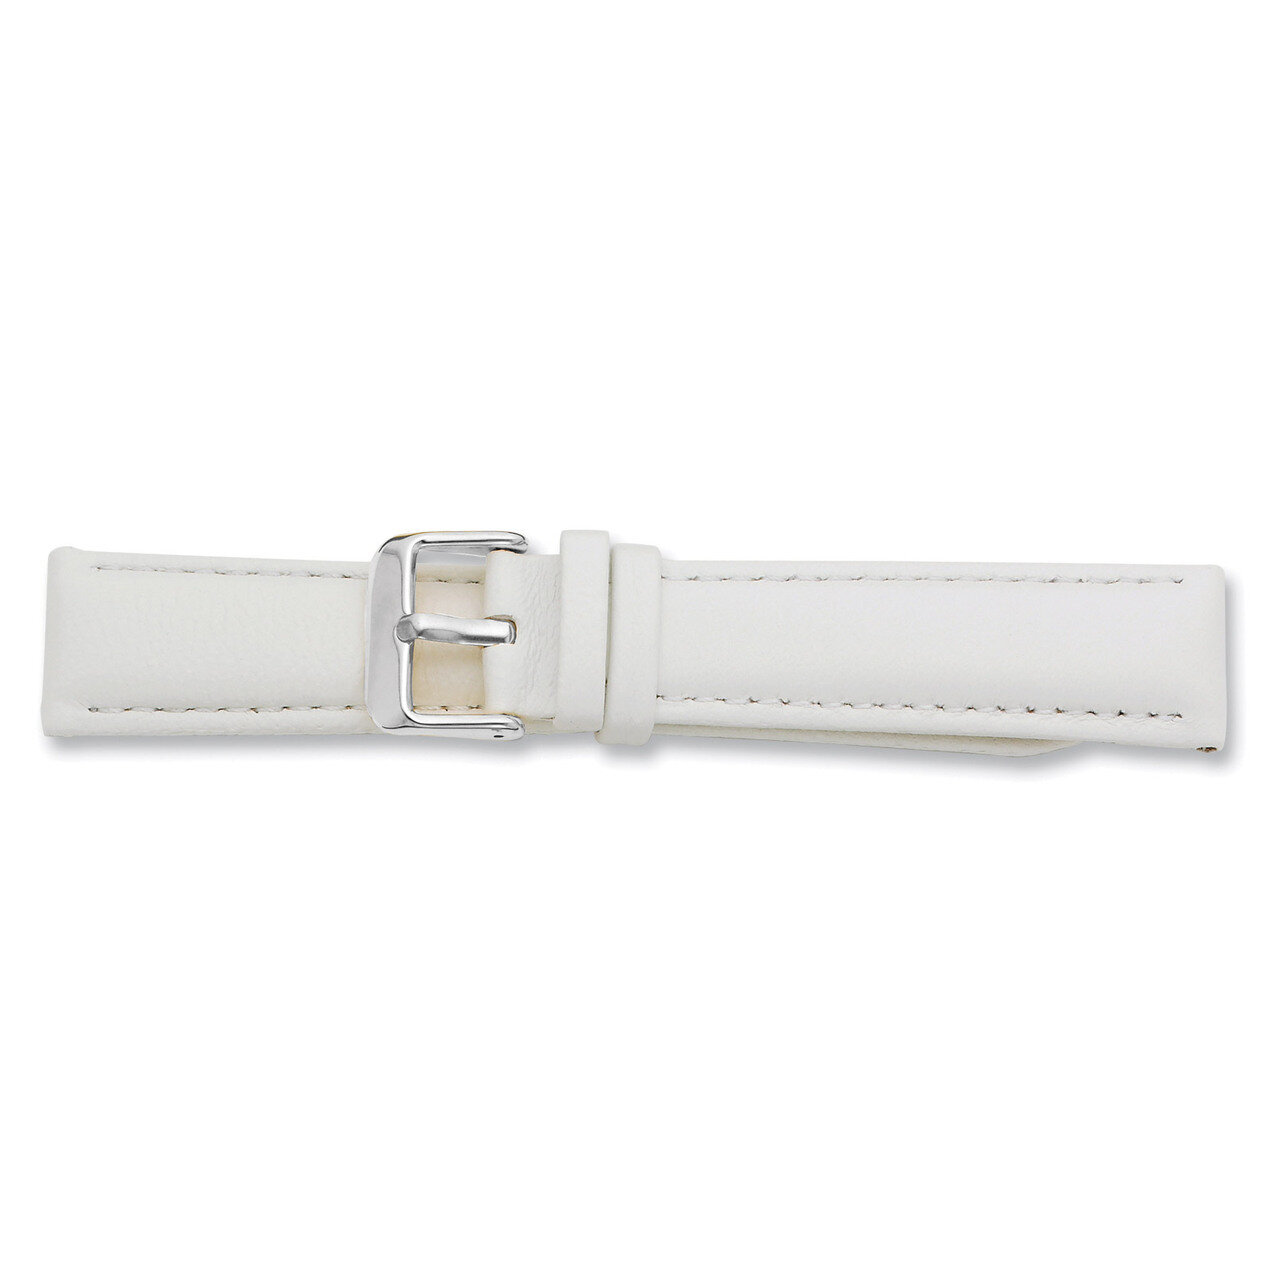 20mm White Glove Leather Watch Band 7.75 Inch Silver-tone Buckle BAW197-20